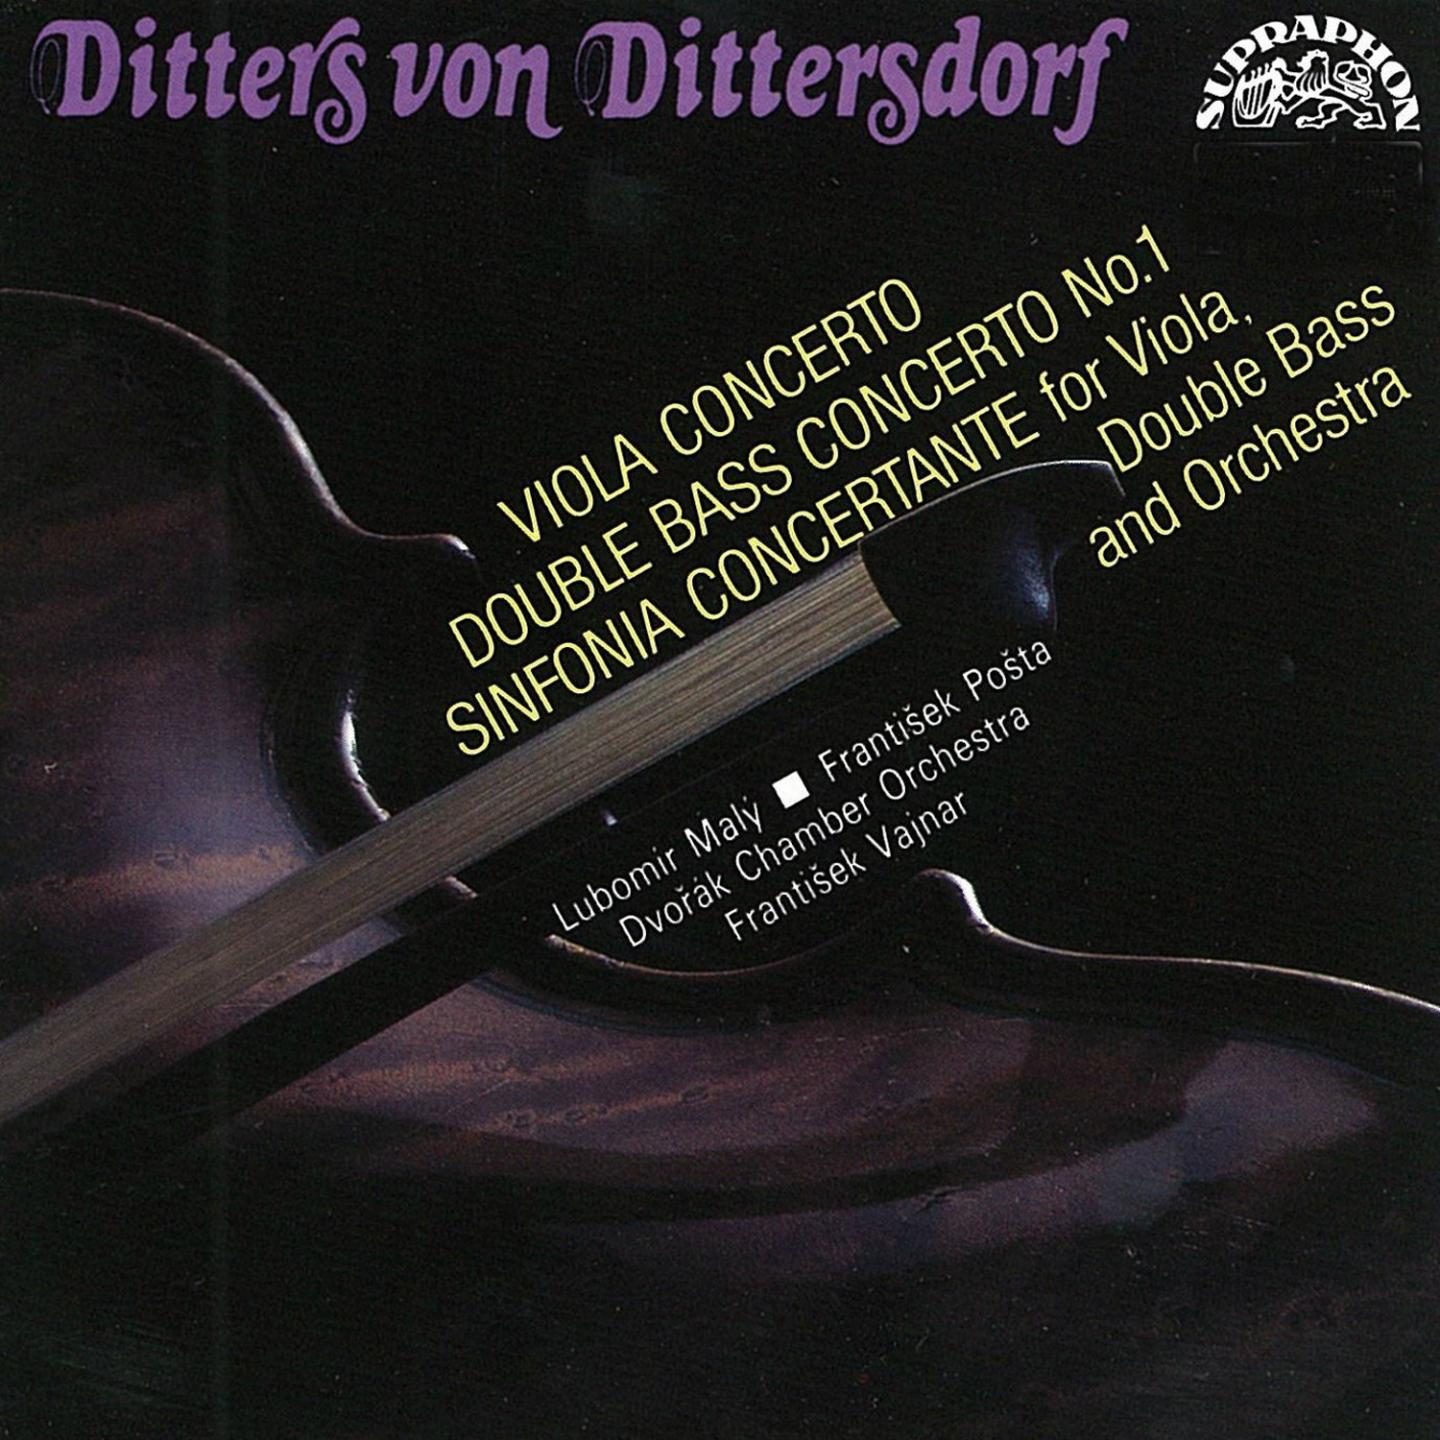 Concerto for Double Bass and Orchestra No. 1 in E-Flat Major: I. Allegro